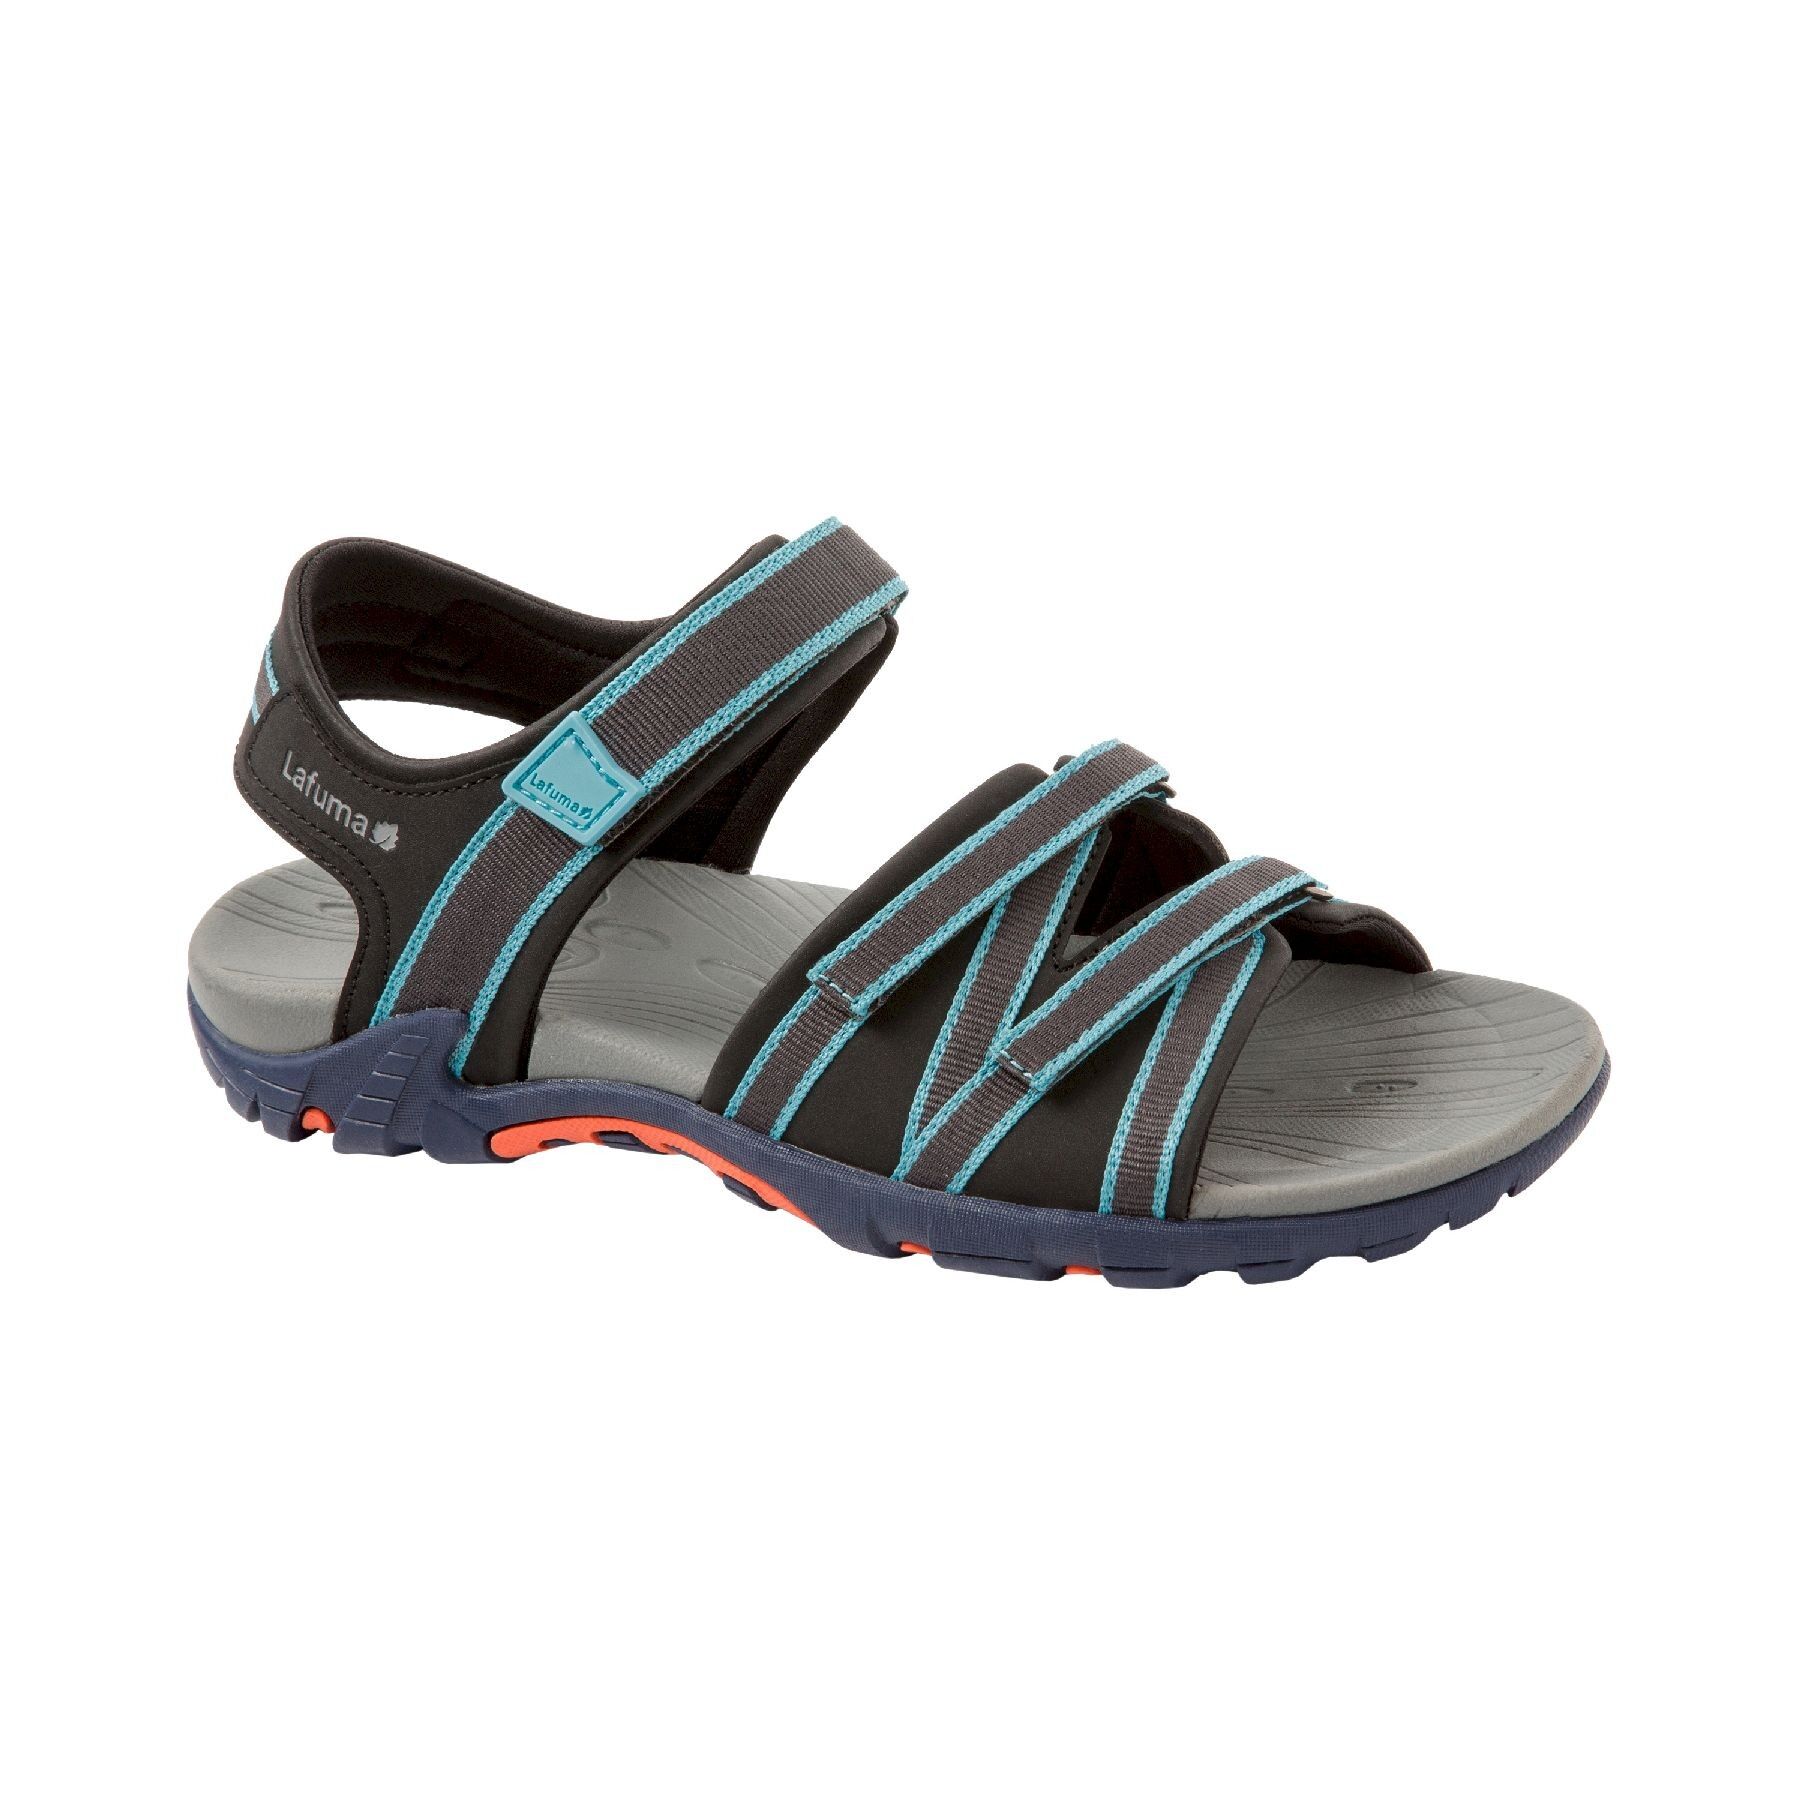 Comfortable Walking Sandals with Arch Support | Vionic Shoes